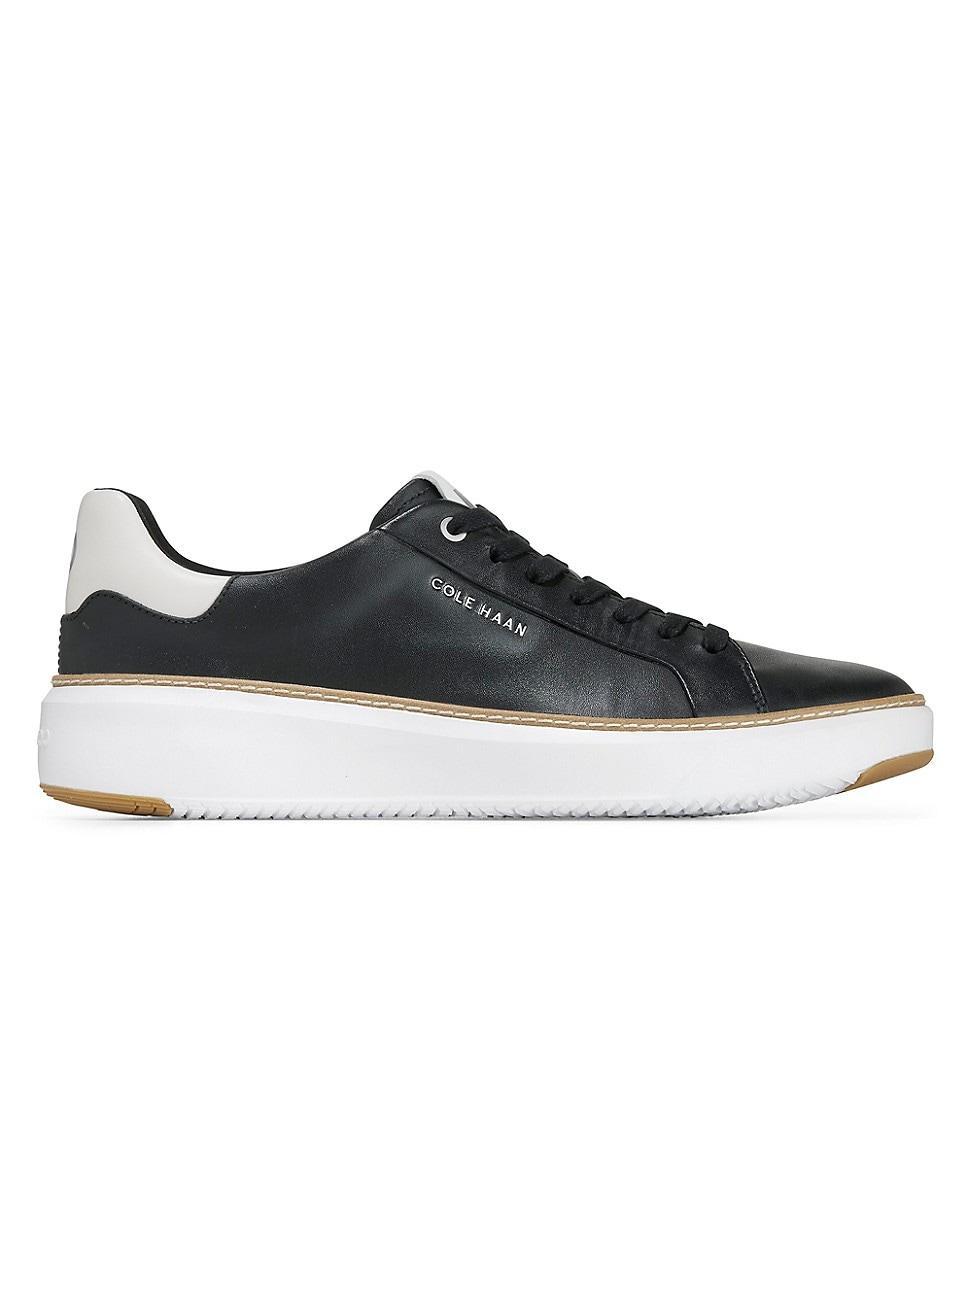 Cole Haan GrandPro Topspin Sneaker Product Image